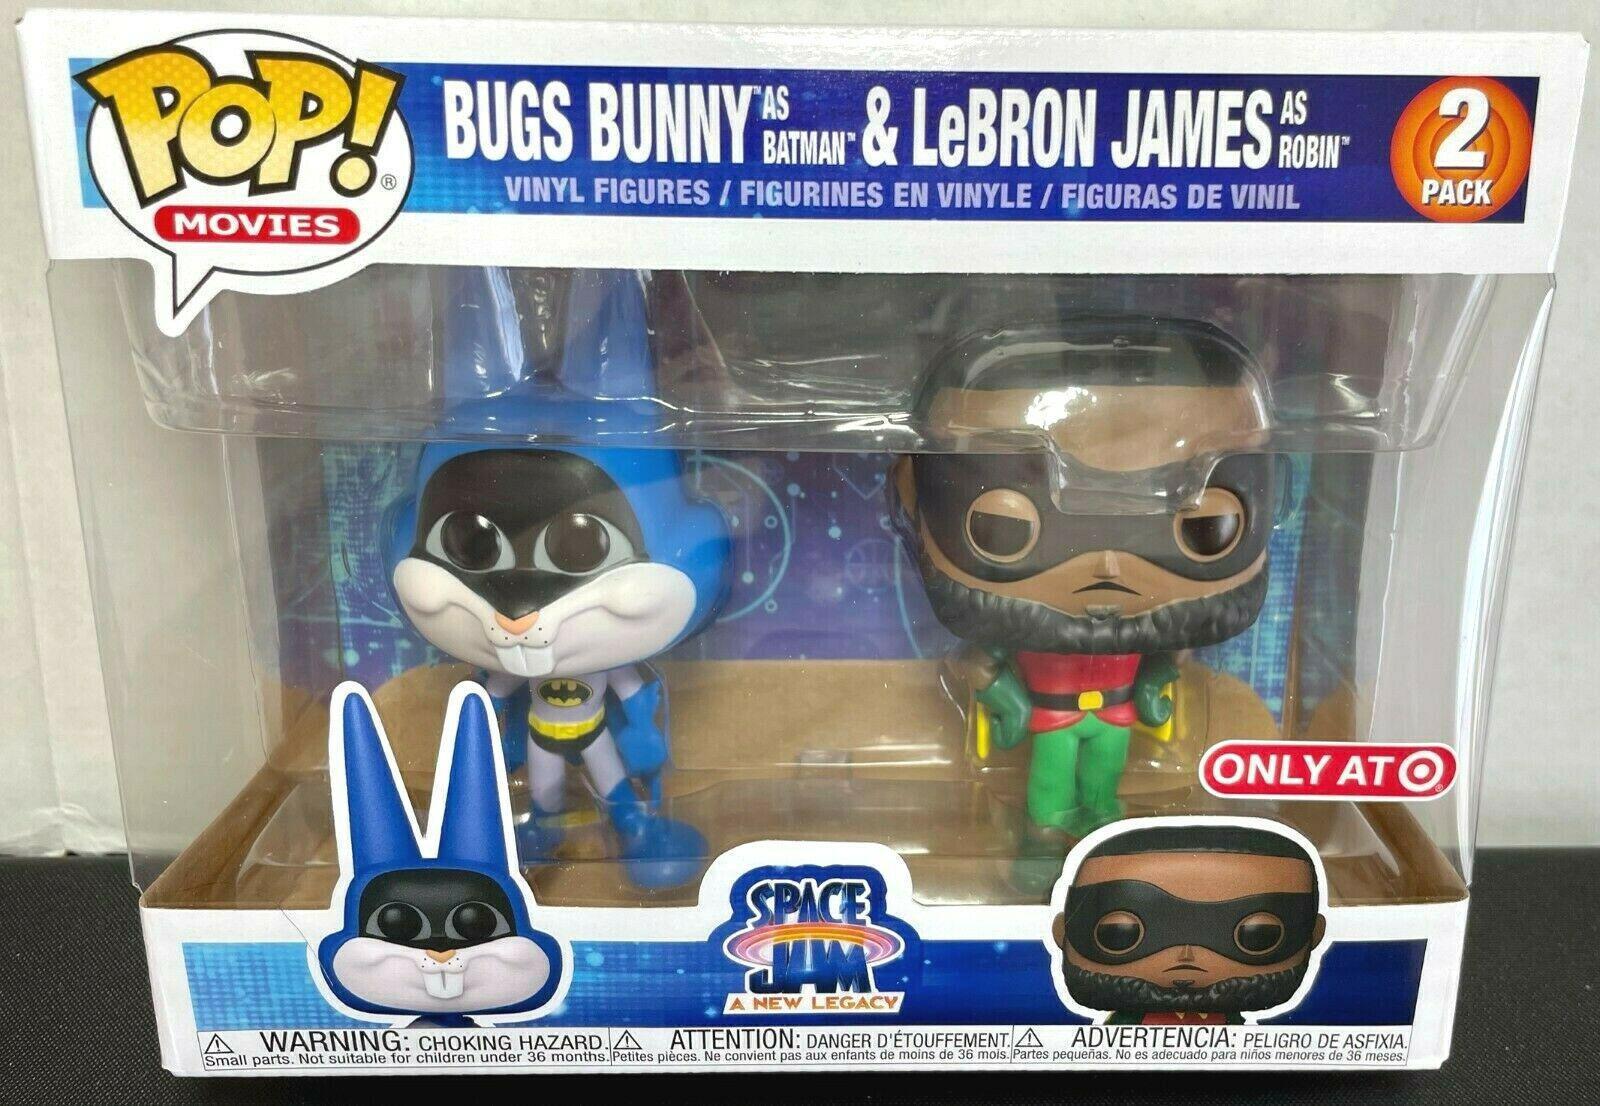 2-Pack Bugs Bunny as Batman and Lebron James as Robin - Funko Pop Price